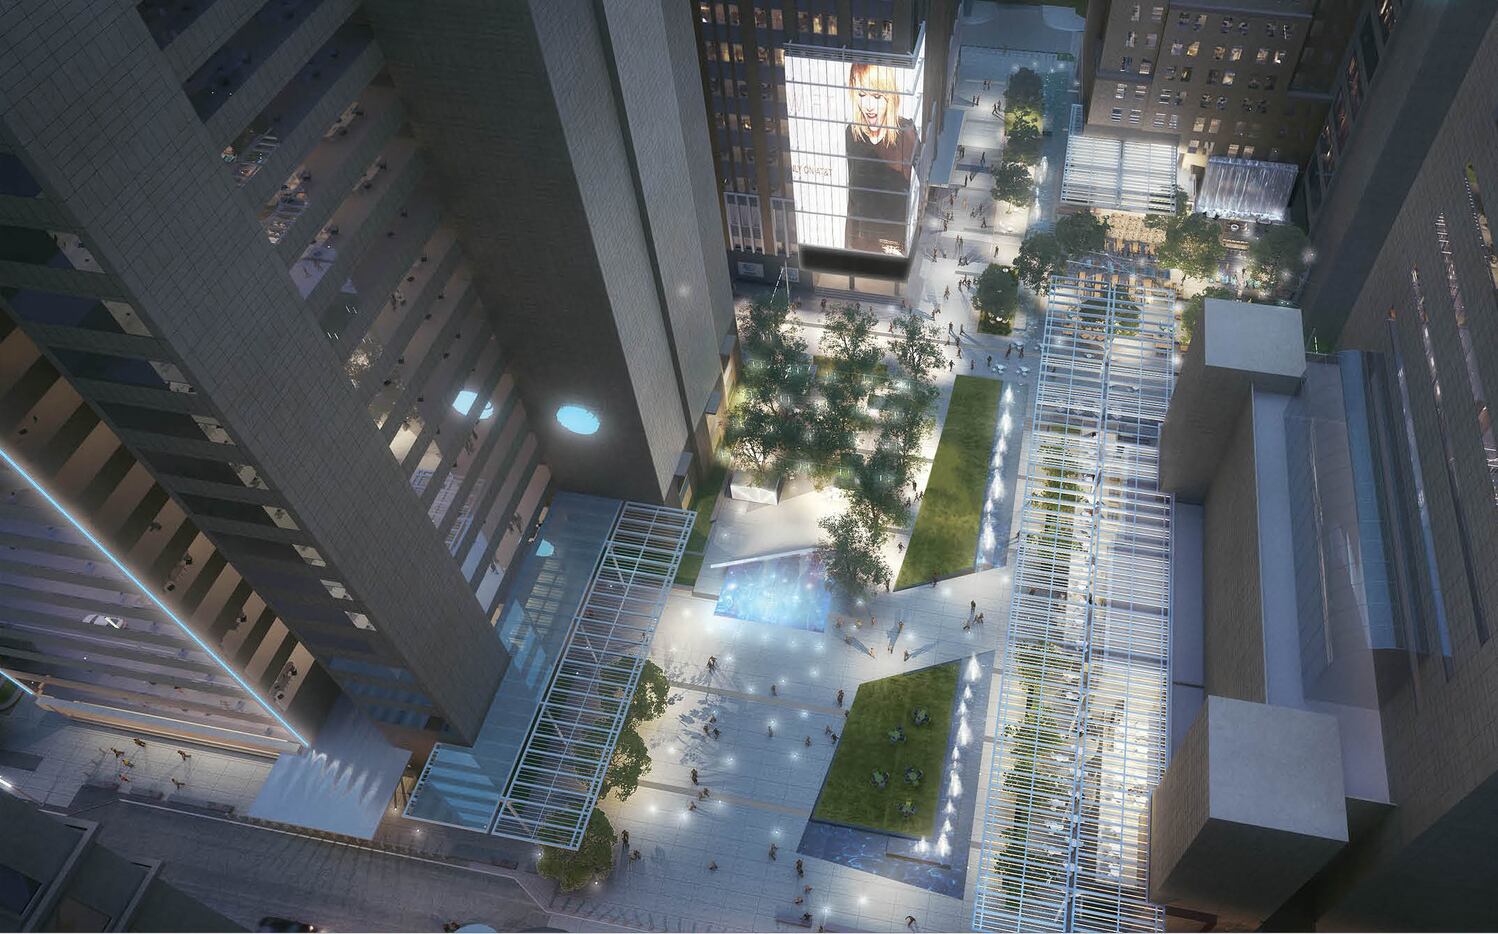 AT&T's new downtown Discovery District will open in late 2019 at Commerce and Akard streets.